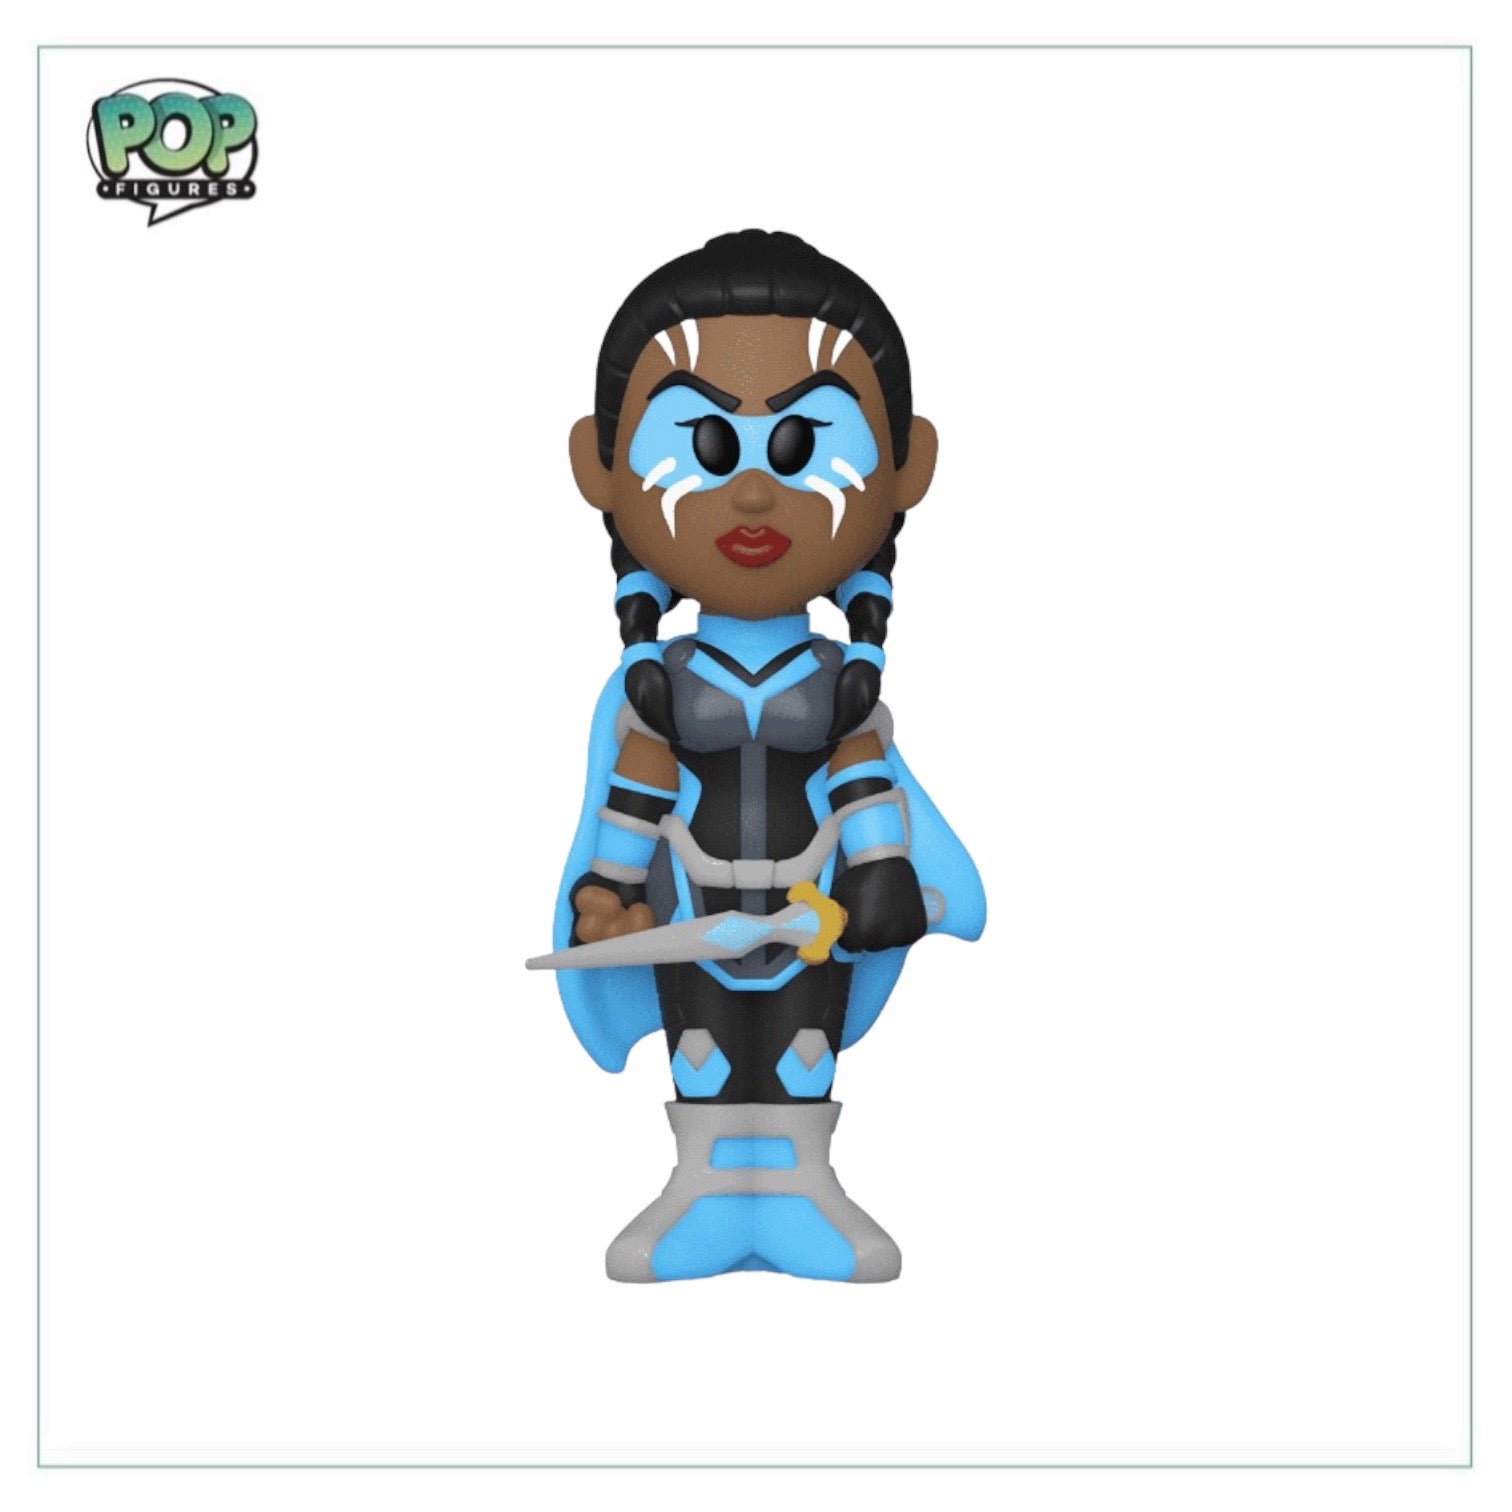 Valkyrie Funko Soda Vinyl Figure! - Marvel - International WonderCon 2023 Shared Exclusive LE5000 Pcs - Chance of Chase